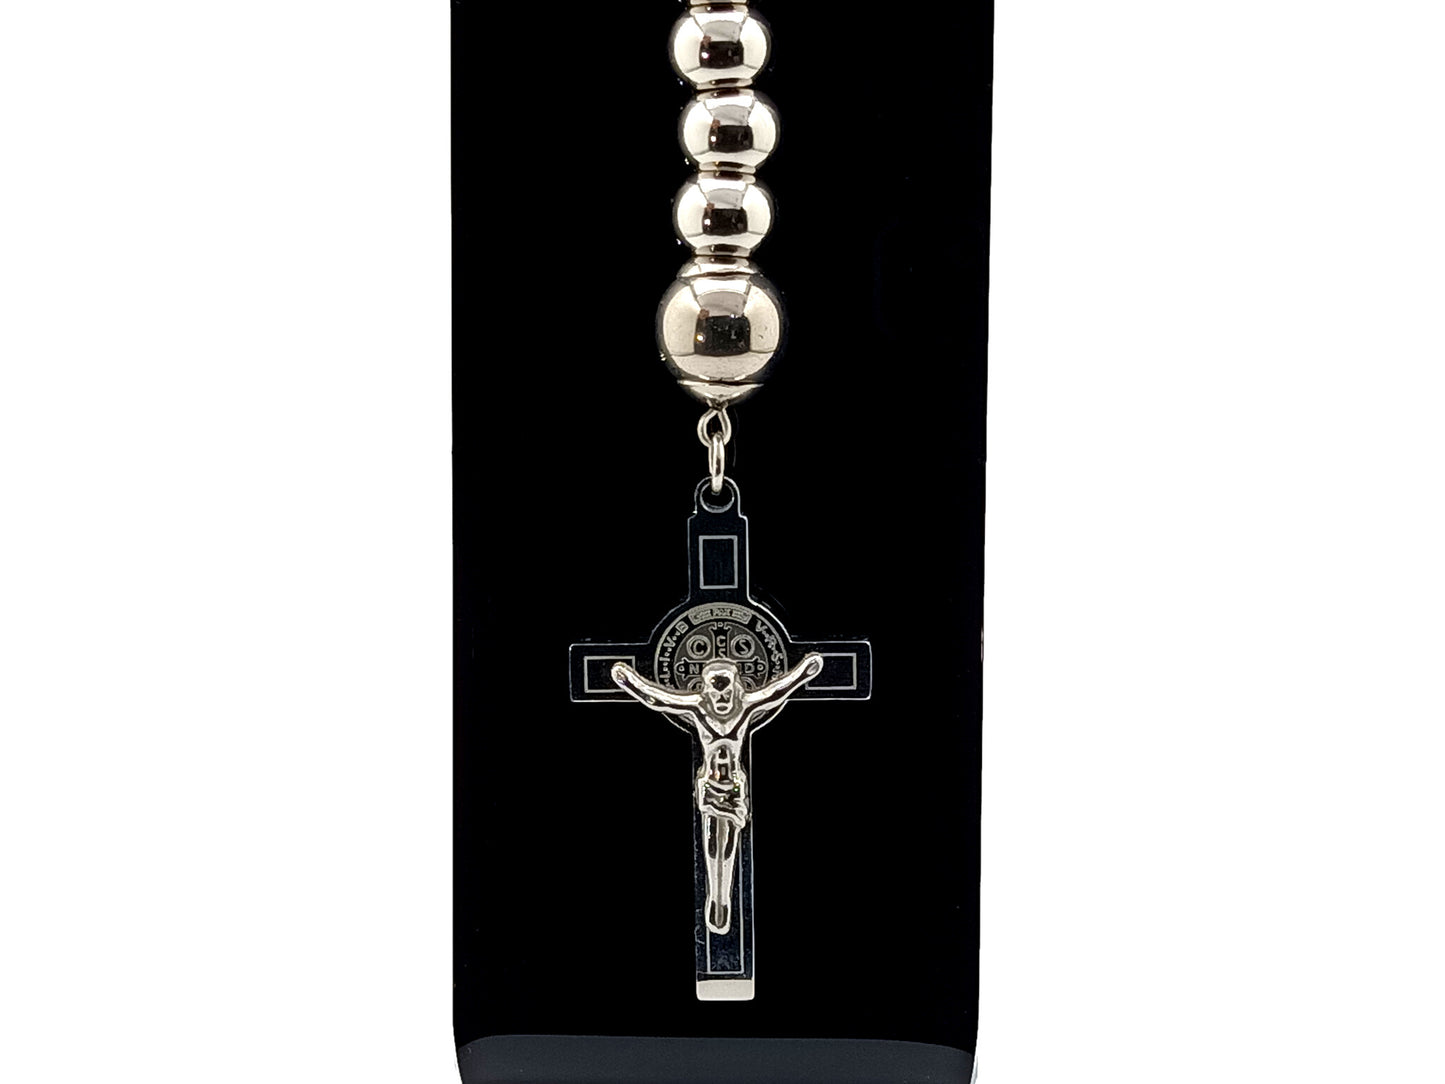 Saint Benedict unique rosary beads stainless steel heavy duty single decade rosary beads with clip and key fob loop.